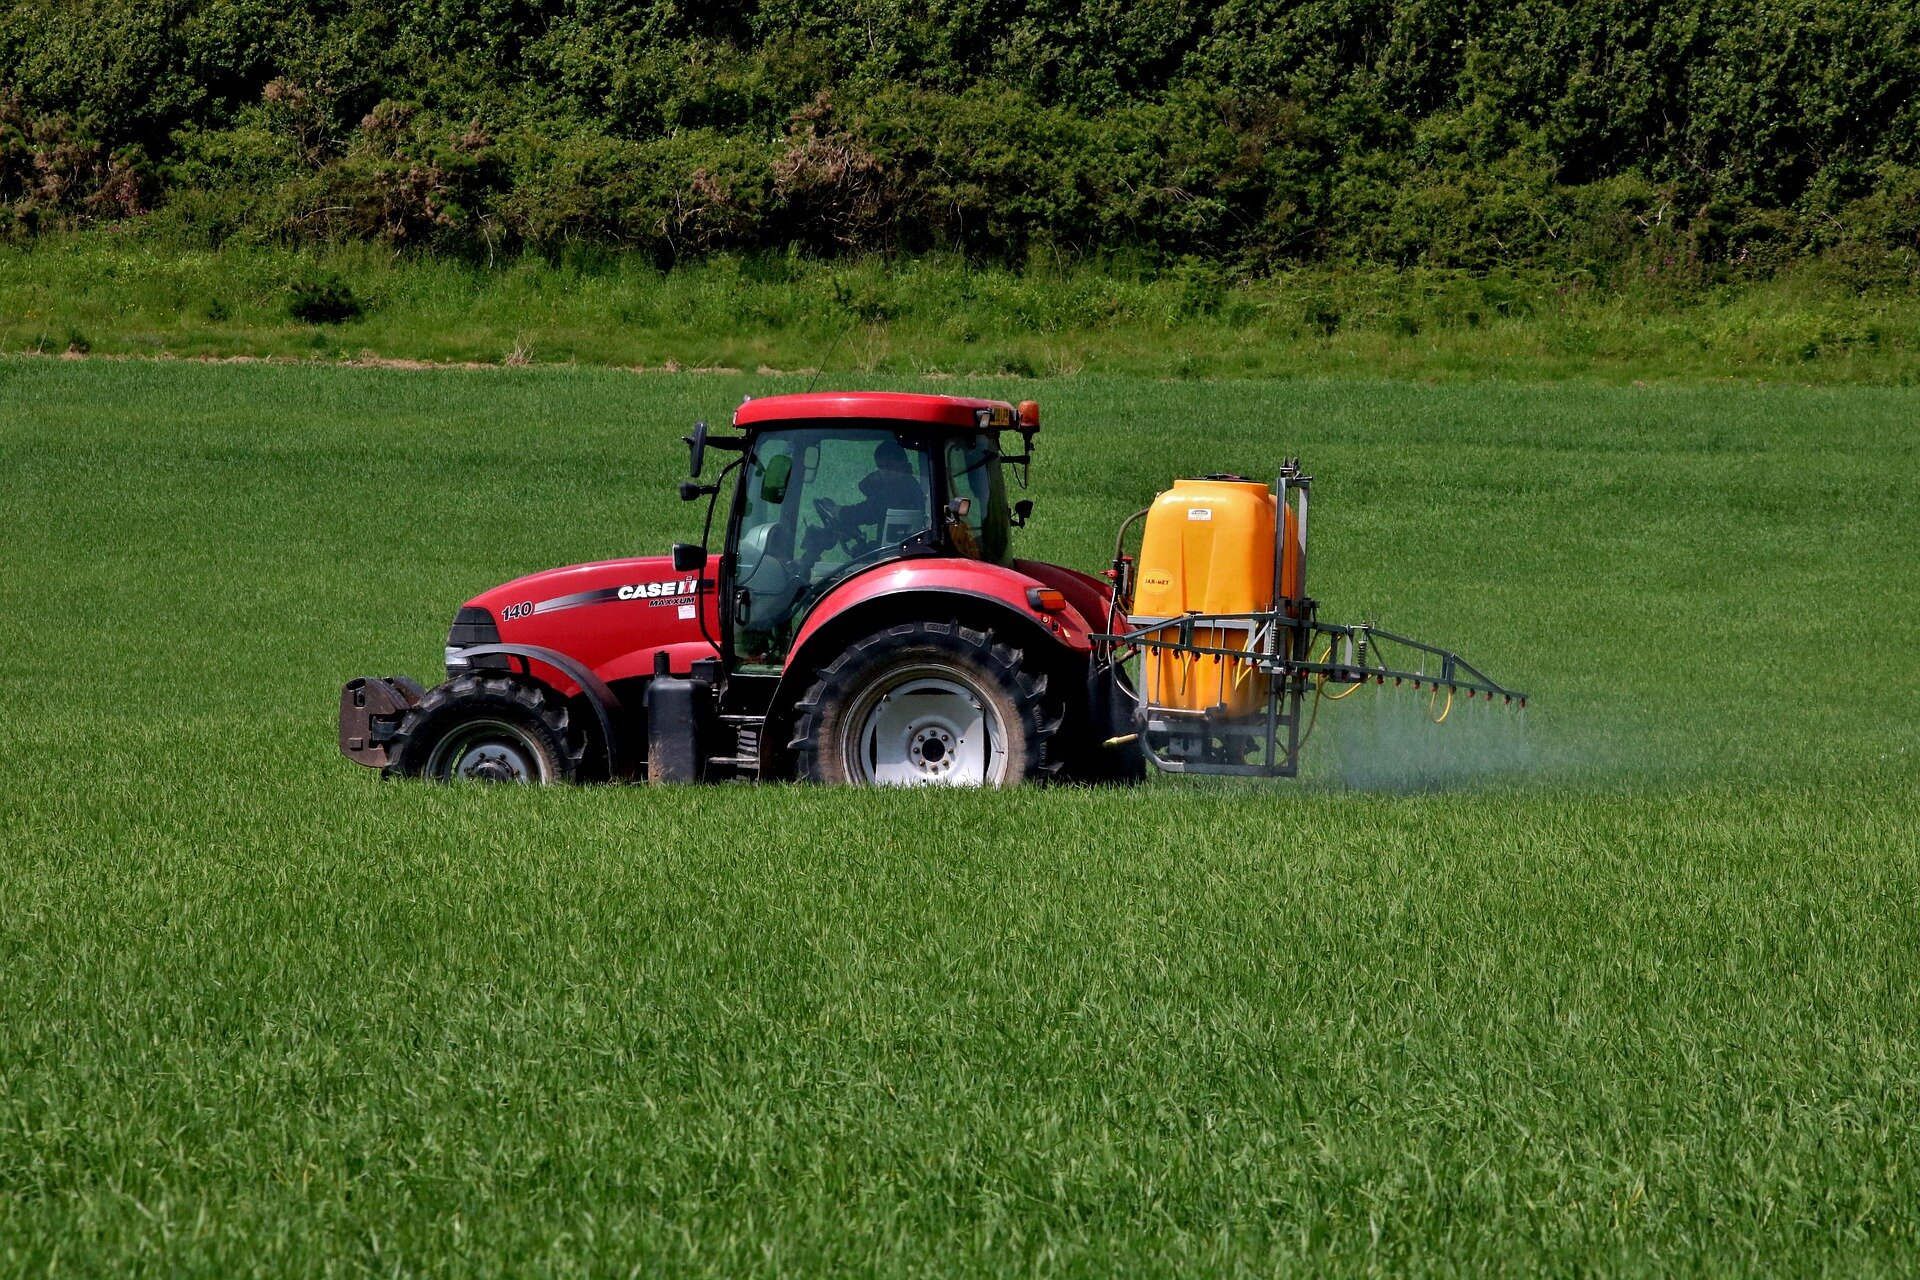 New study finds association between insecticide exposure and lower sperm concentration in adult men